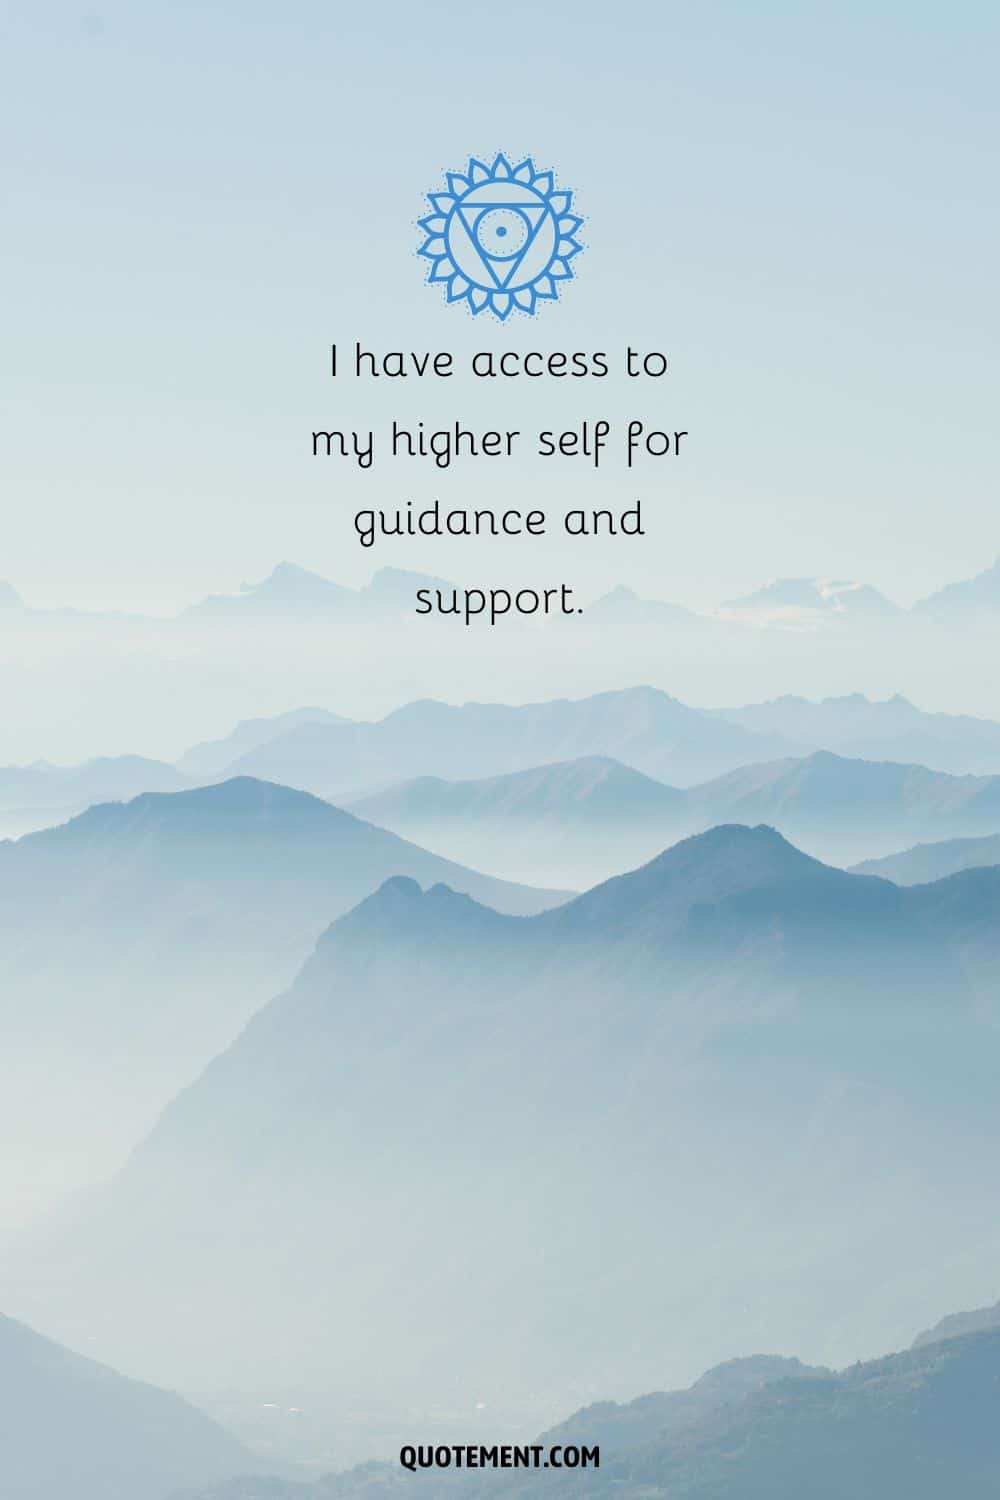 “I have access to my higher self for guidance and support.”